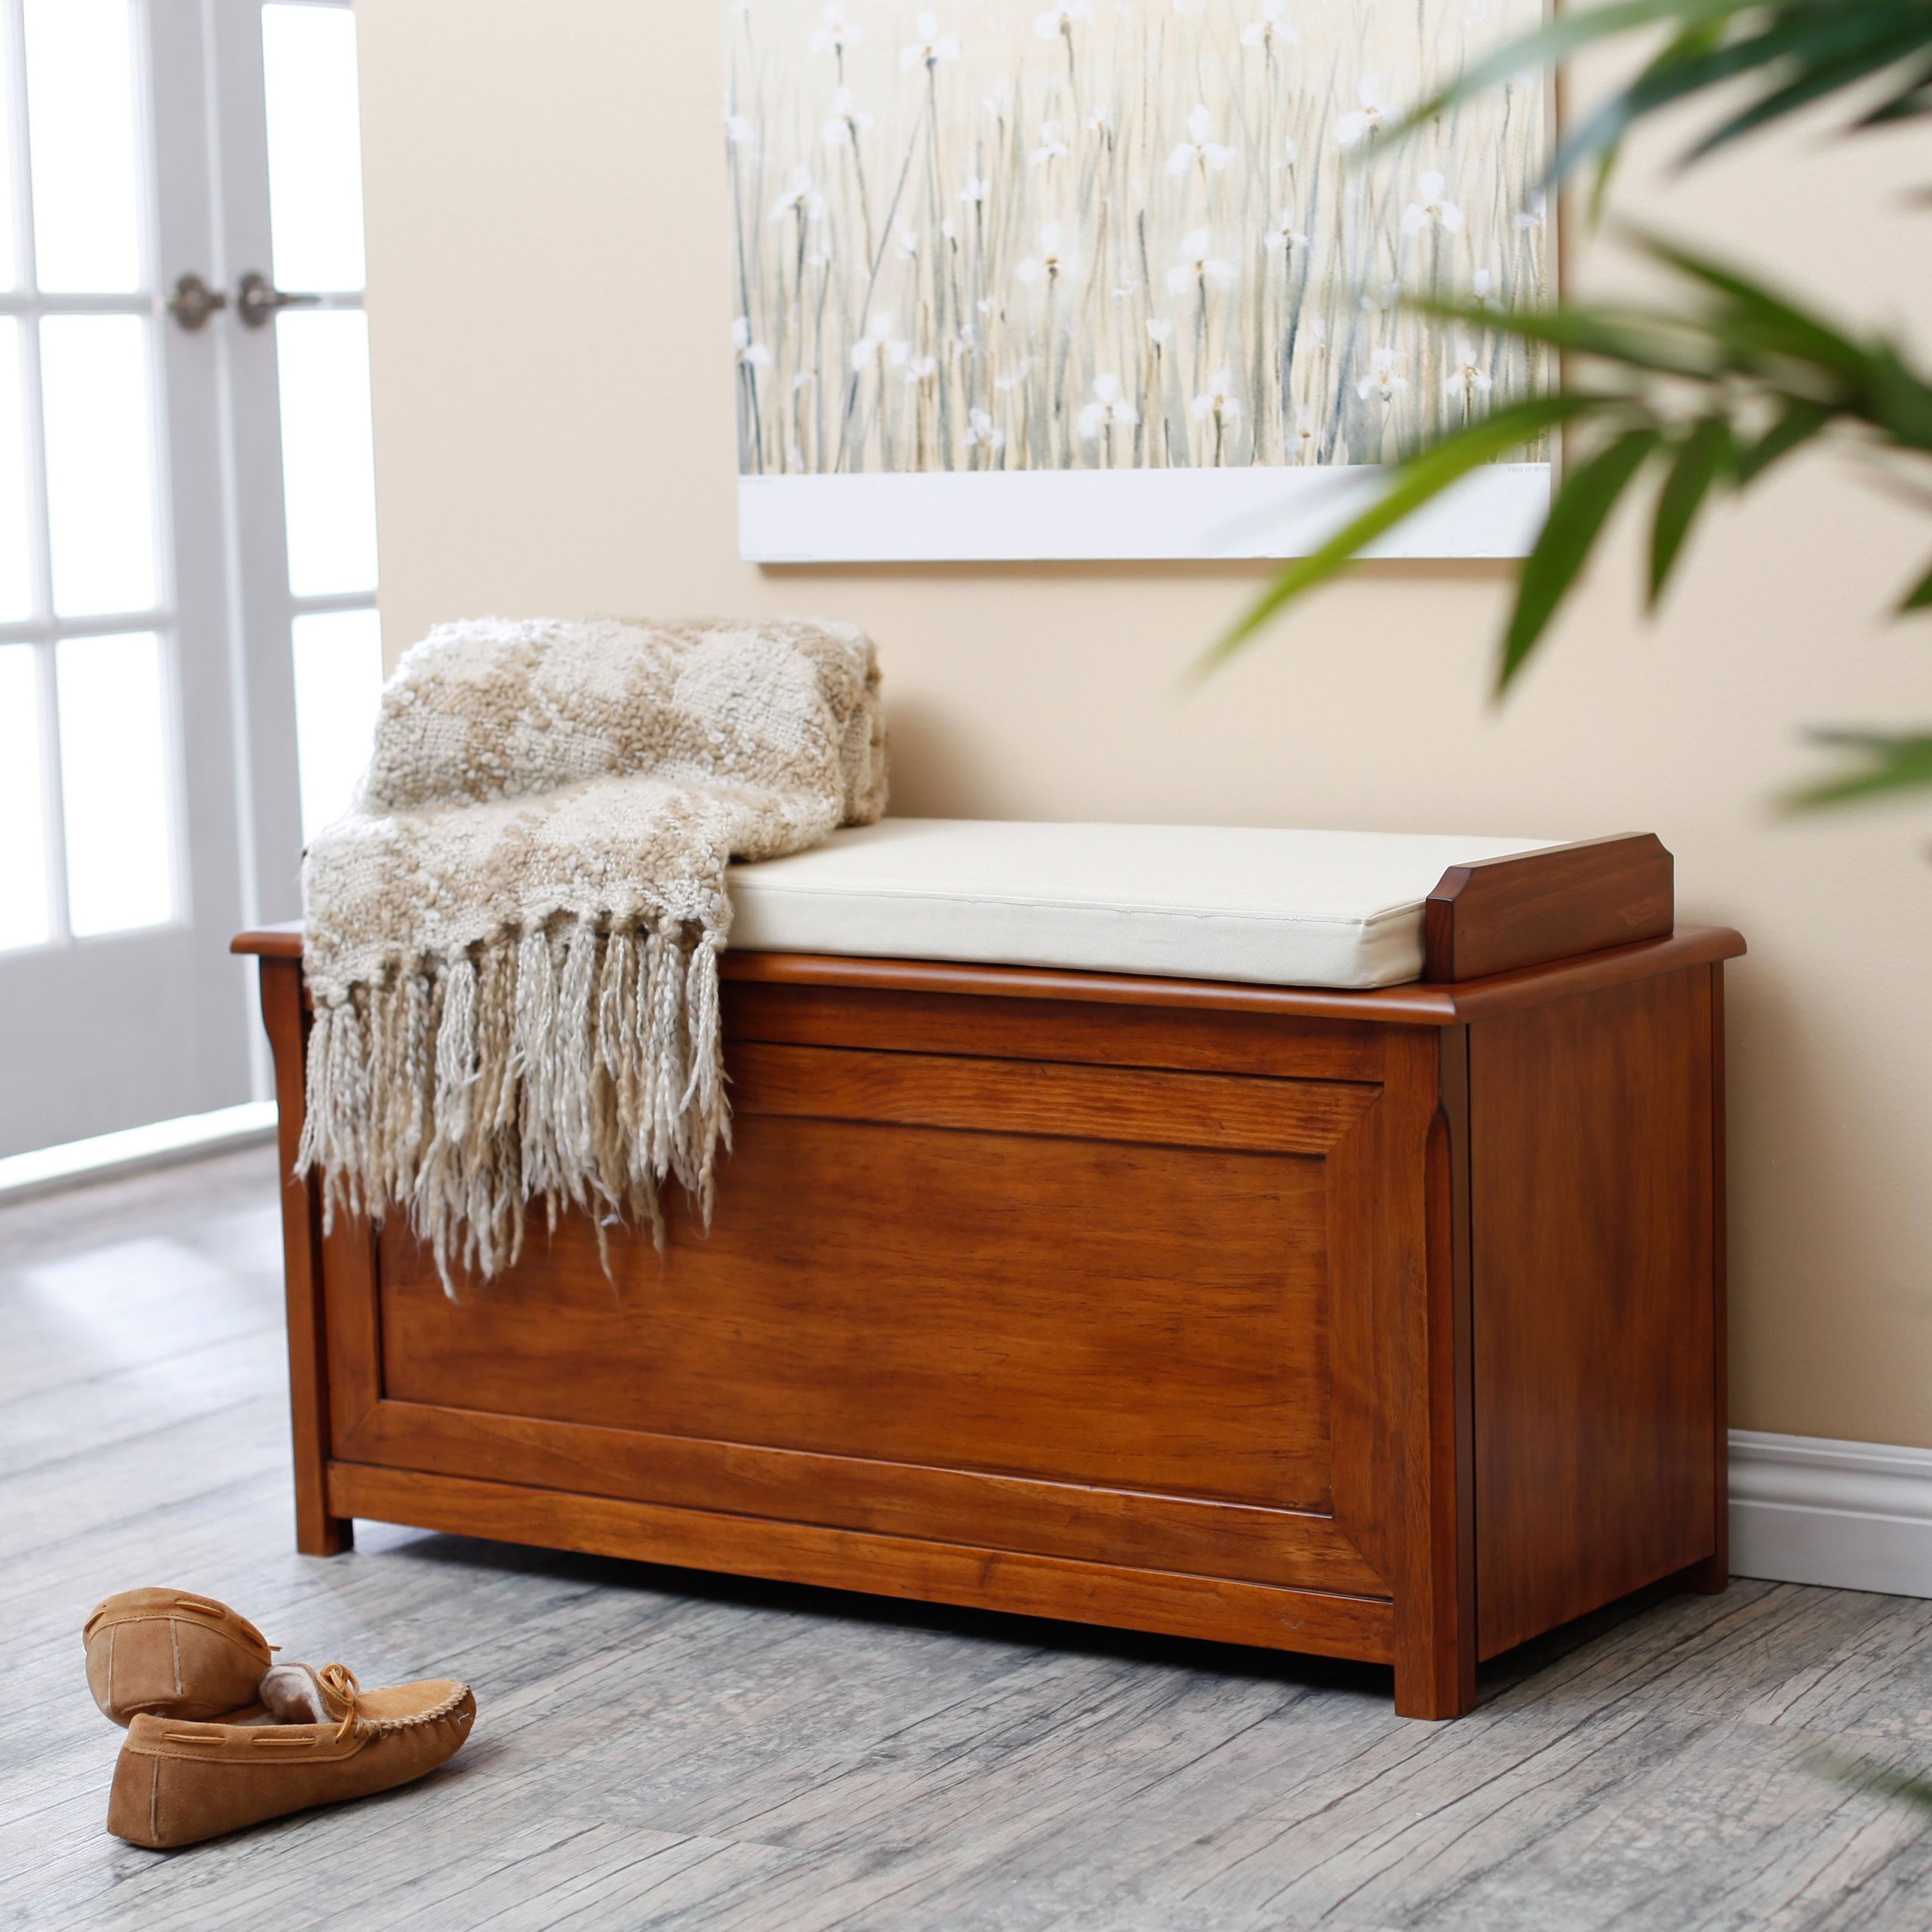 Bedroom Storage Chest Bench
 Cedar Chest Mission Bench with Cushion Oak Indoor